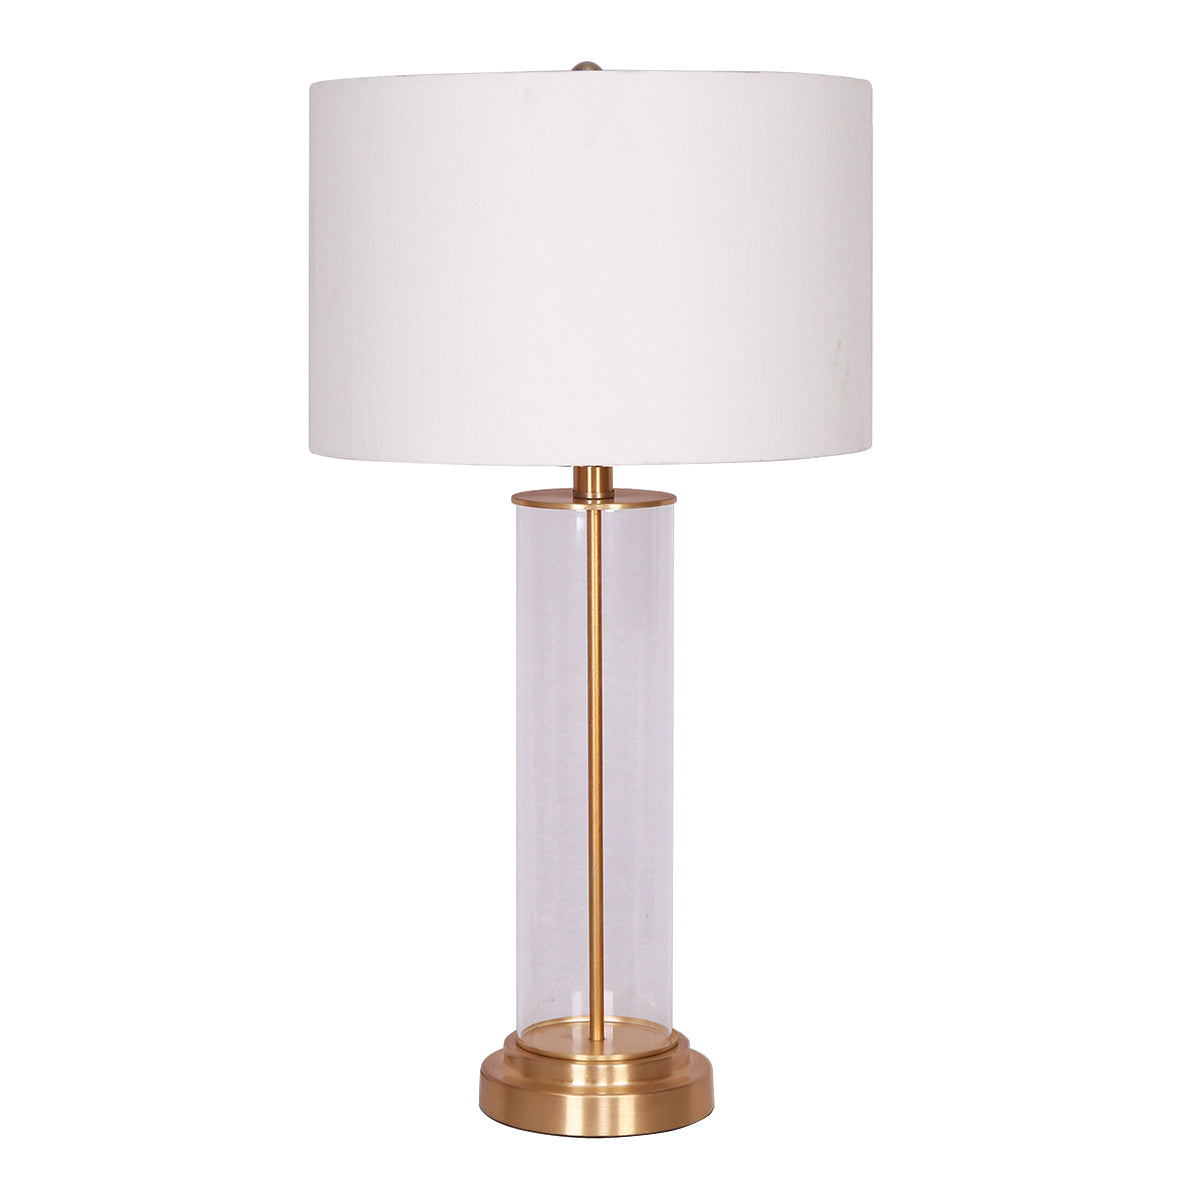 Tate 27" Table Lamp - Gold